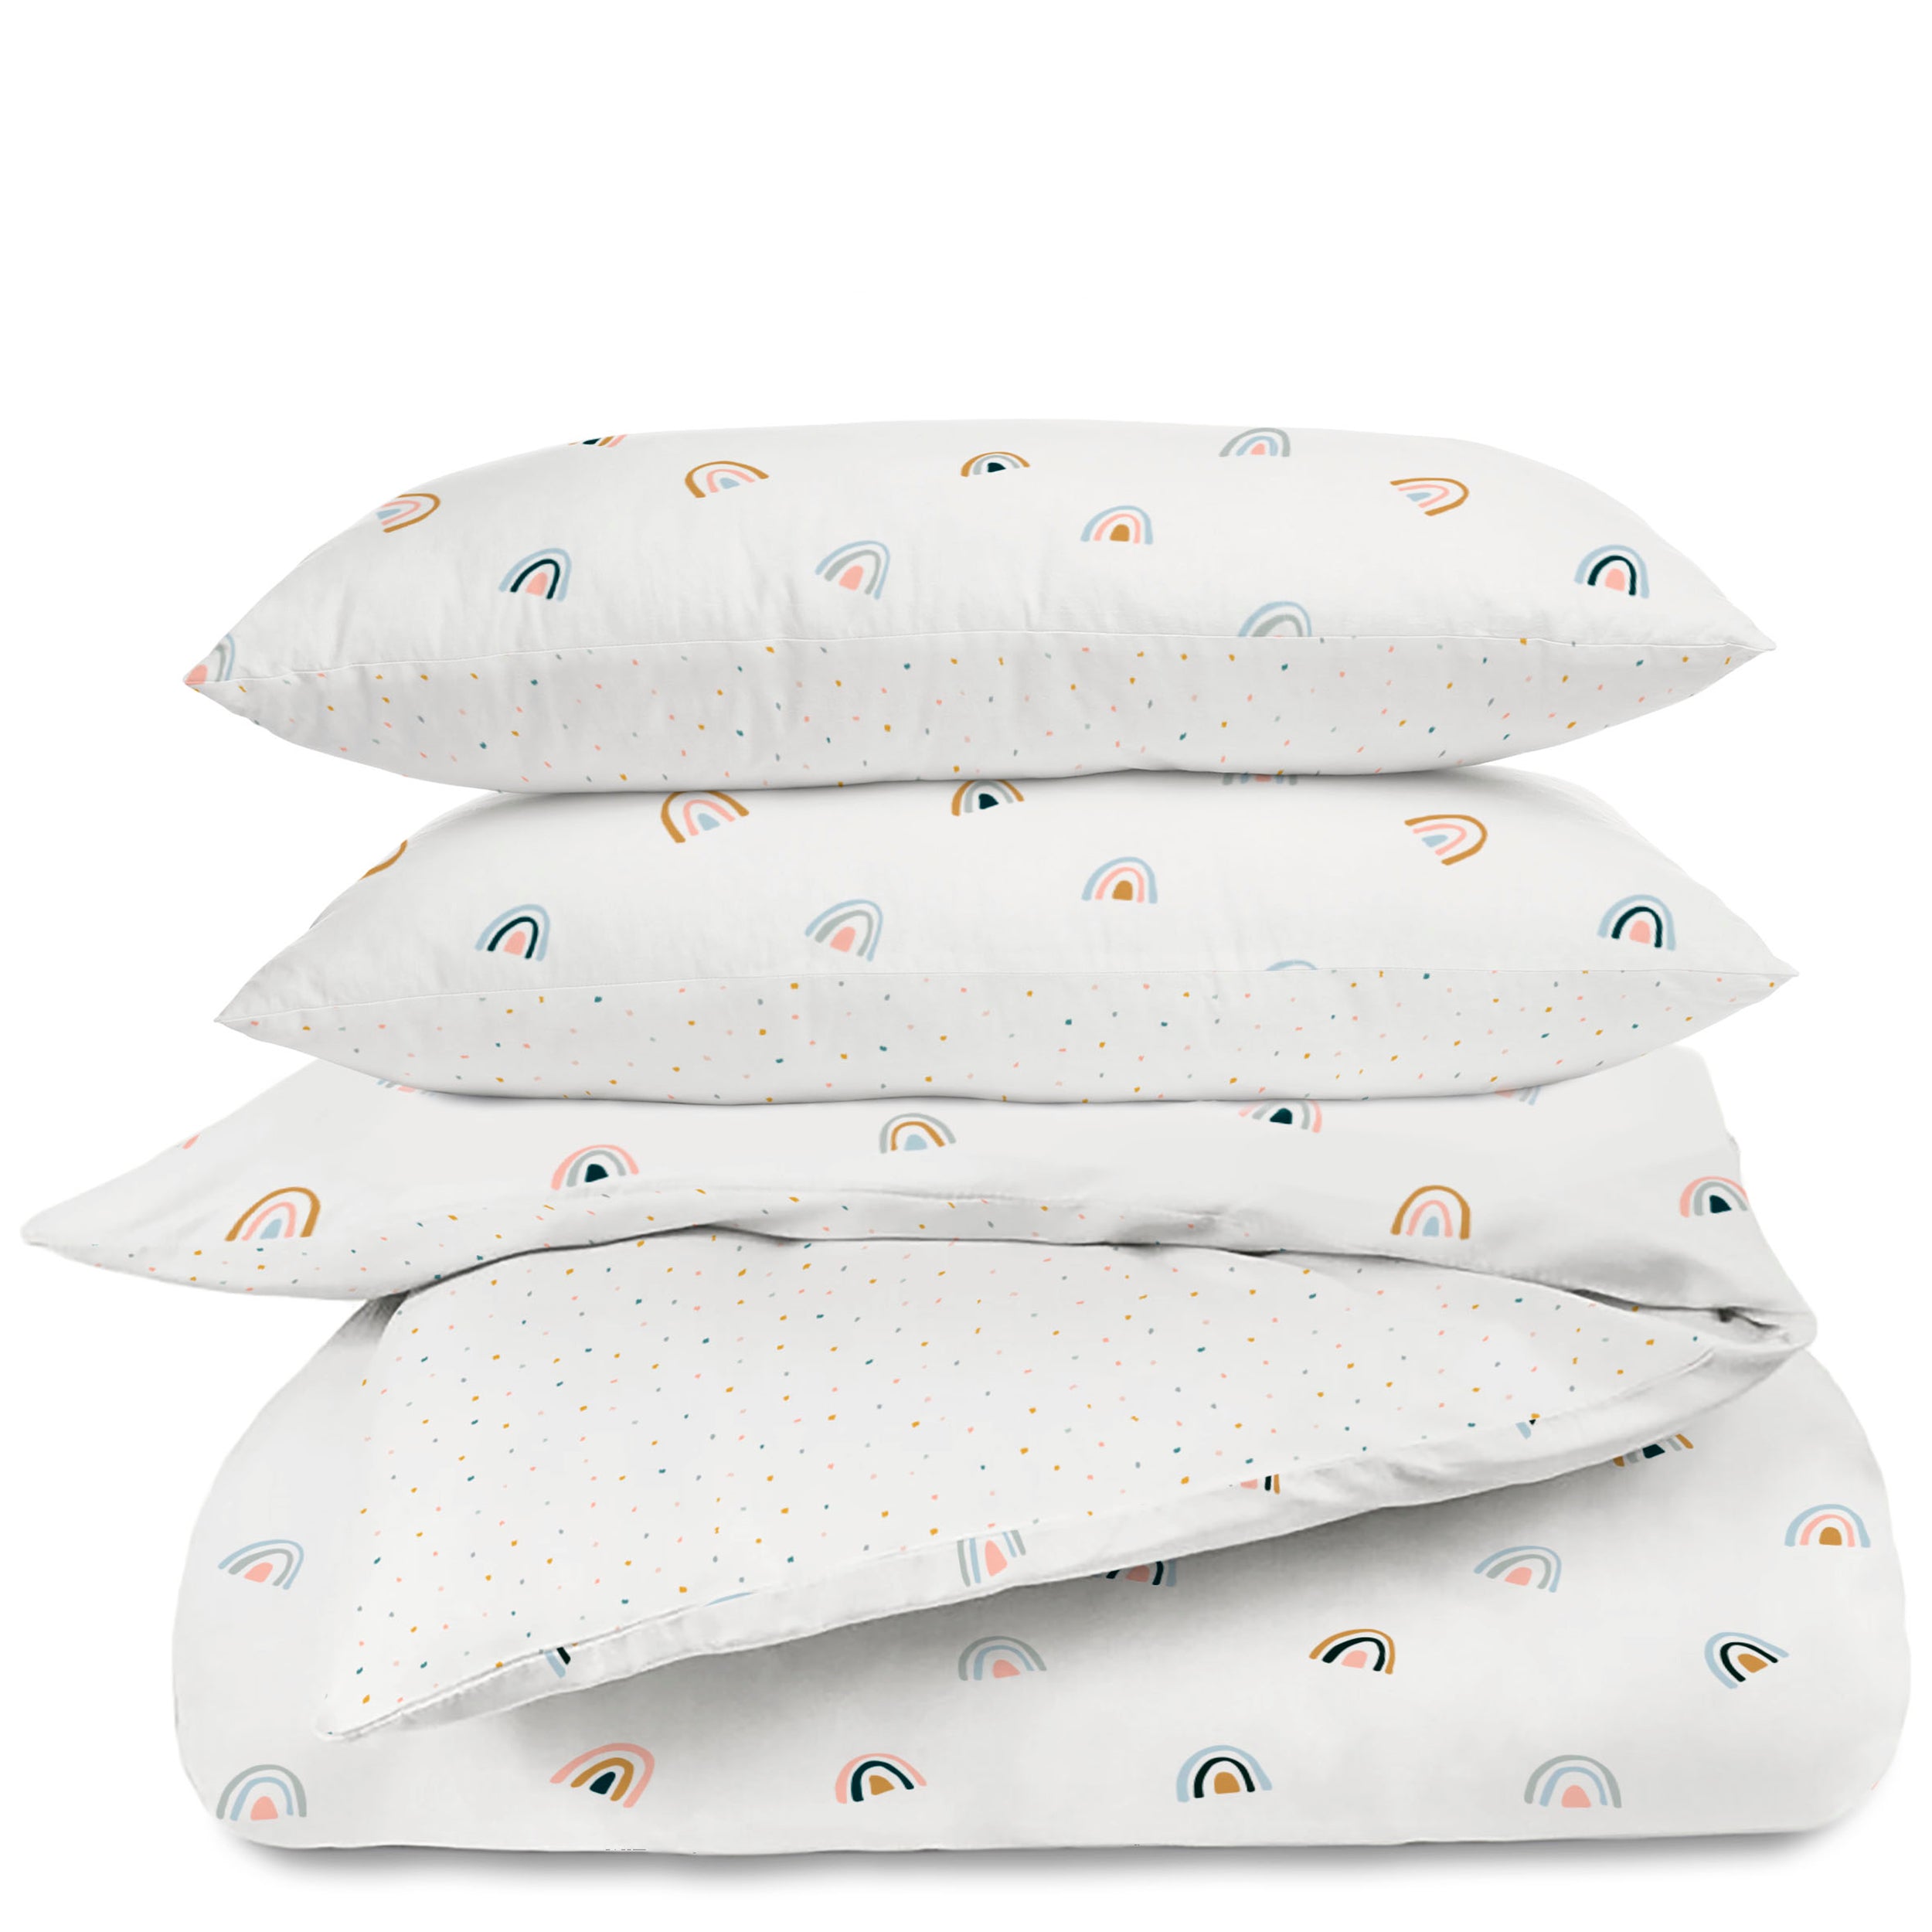 A stack of three white pillows and an Organic Duvet Cover - Dotty & Rainbow by Makemake Organics, all featuring colorful rainbow and dot patterns, against a white background.